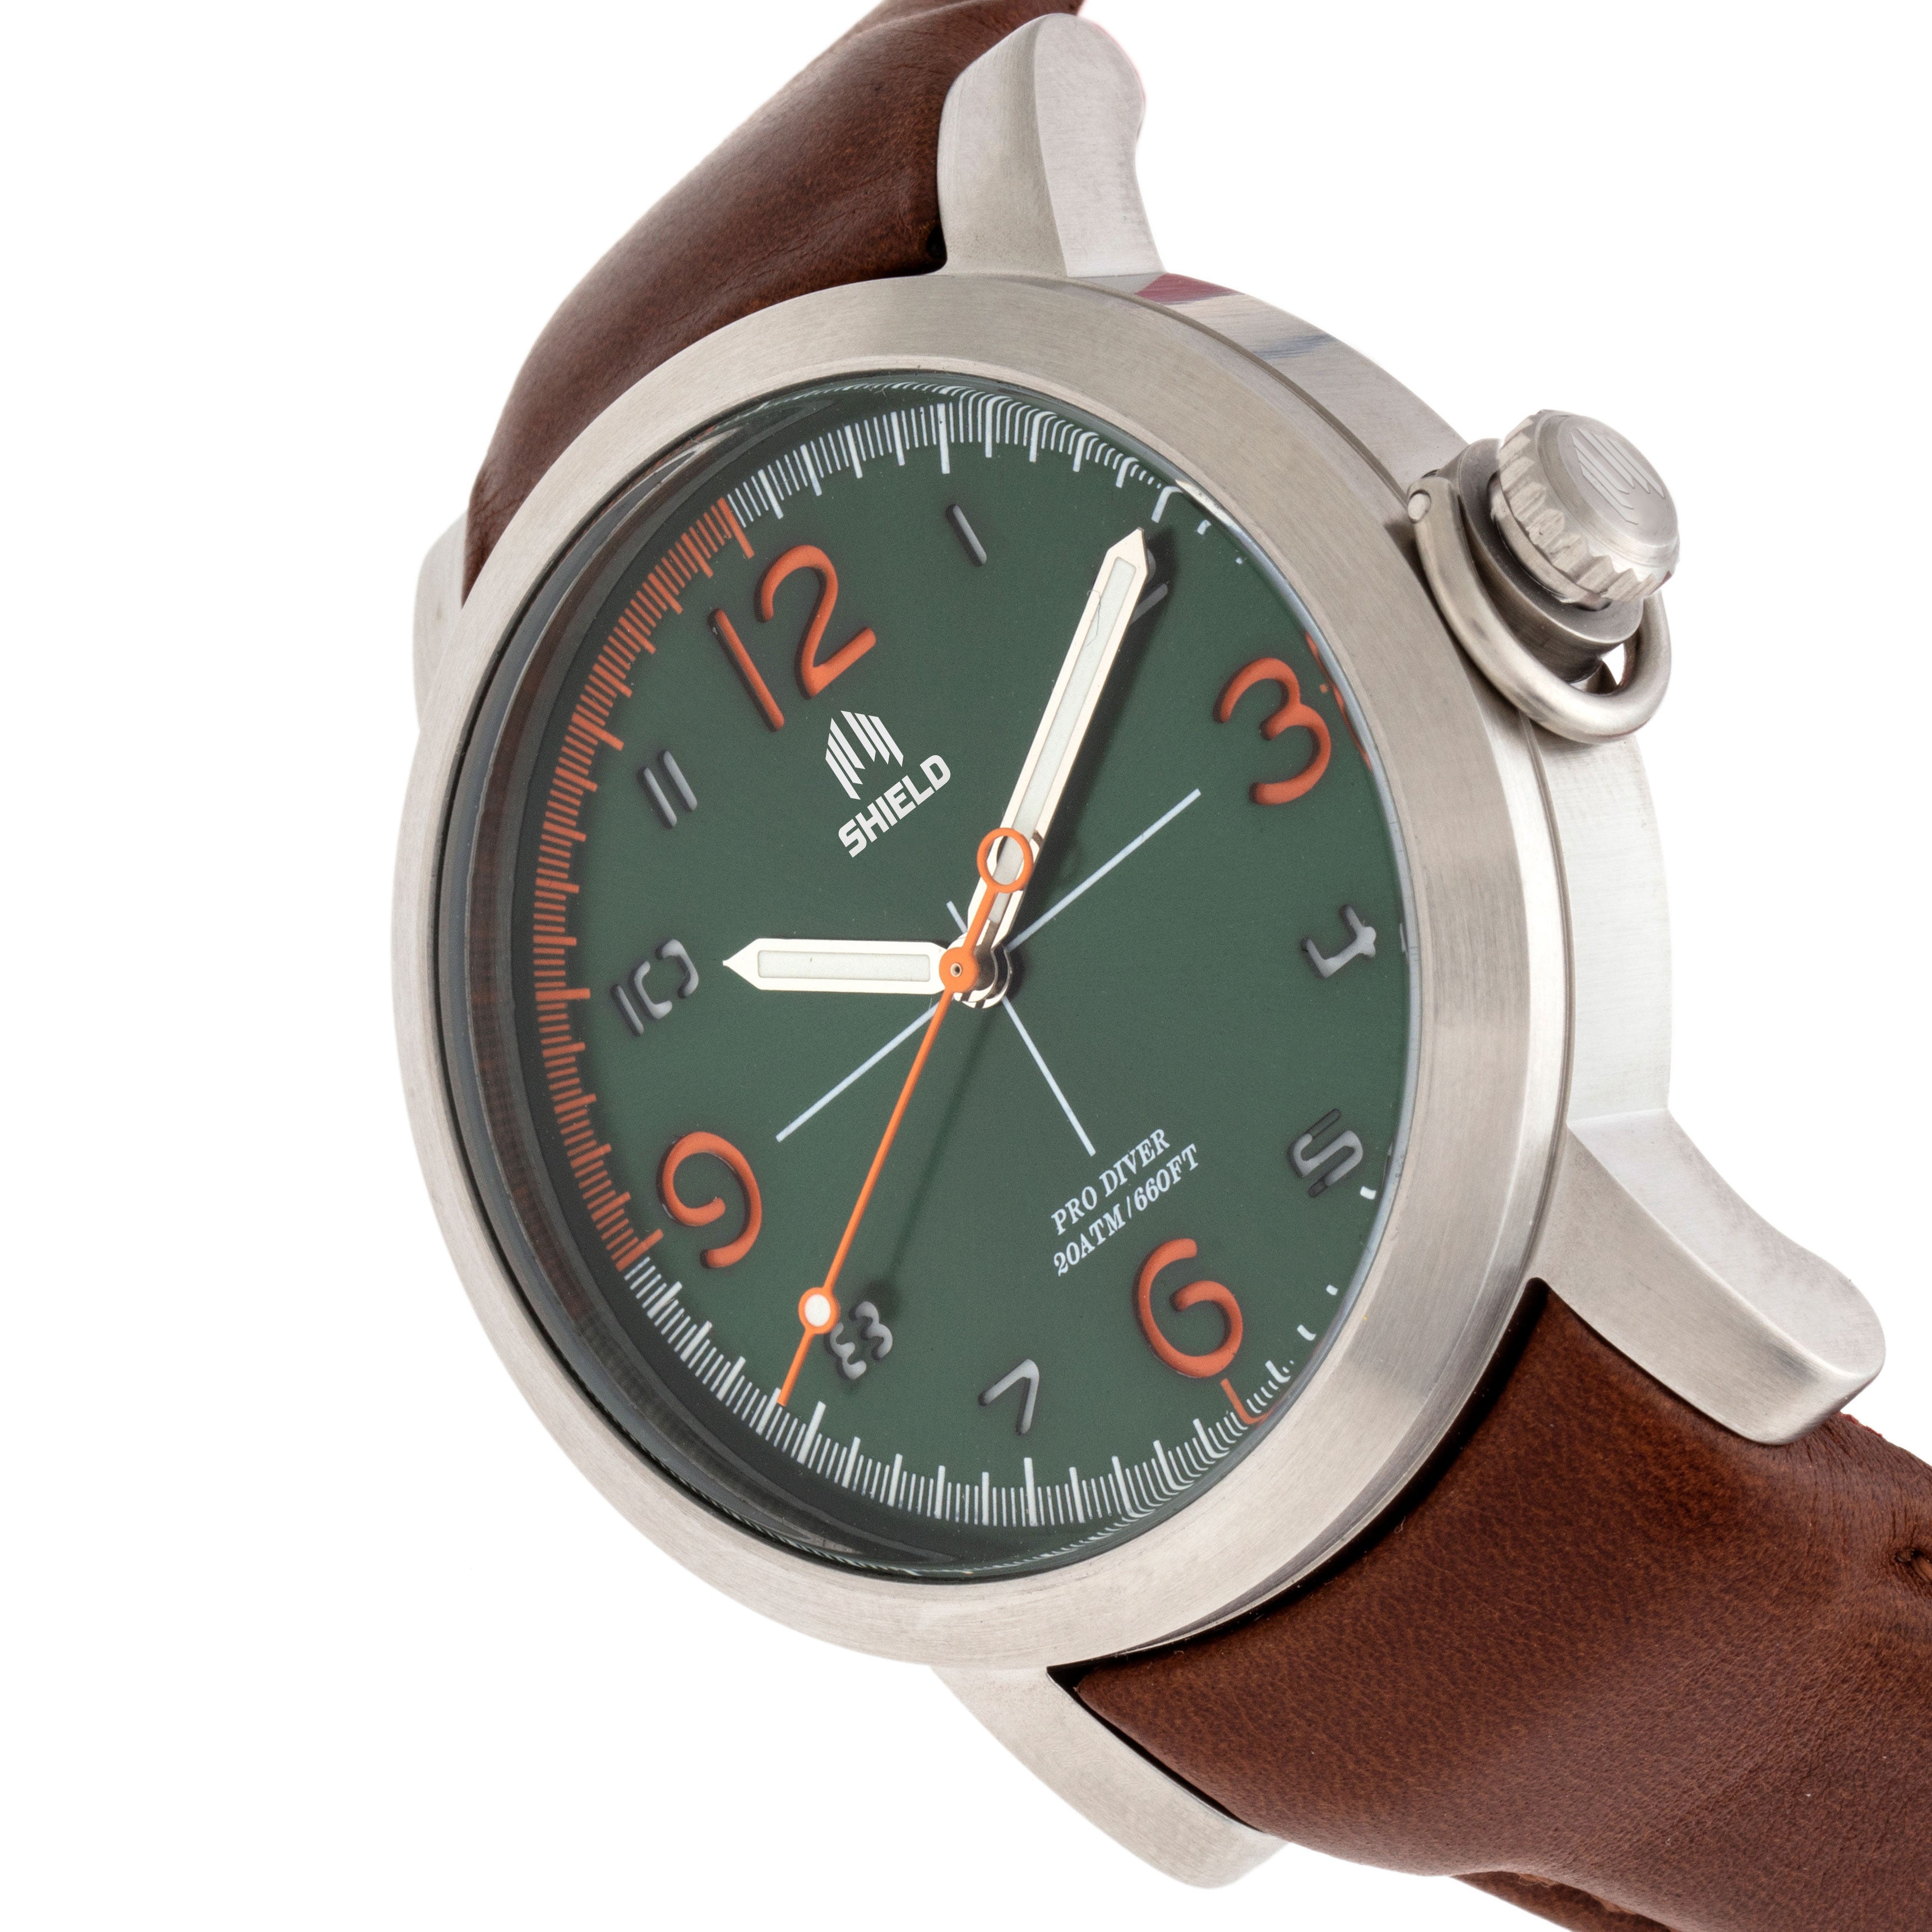 Shield Berge Leather-Band Men's Diver Watch - Silver/Green - SLDSH101-4